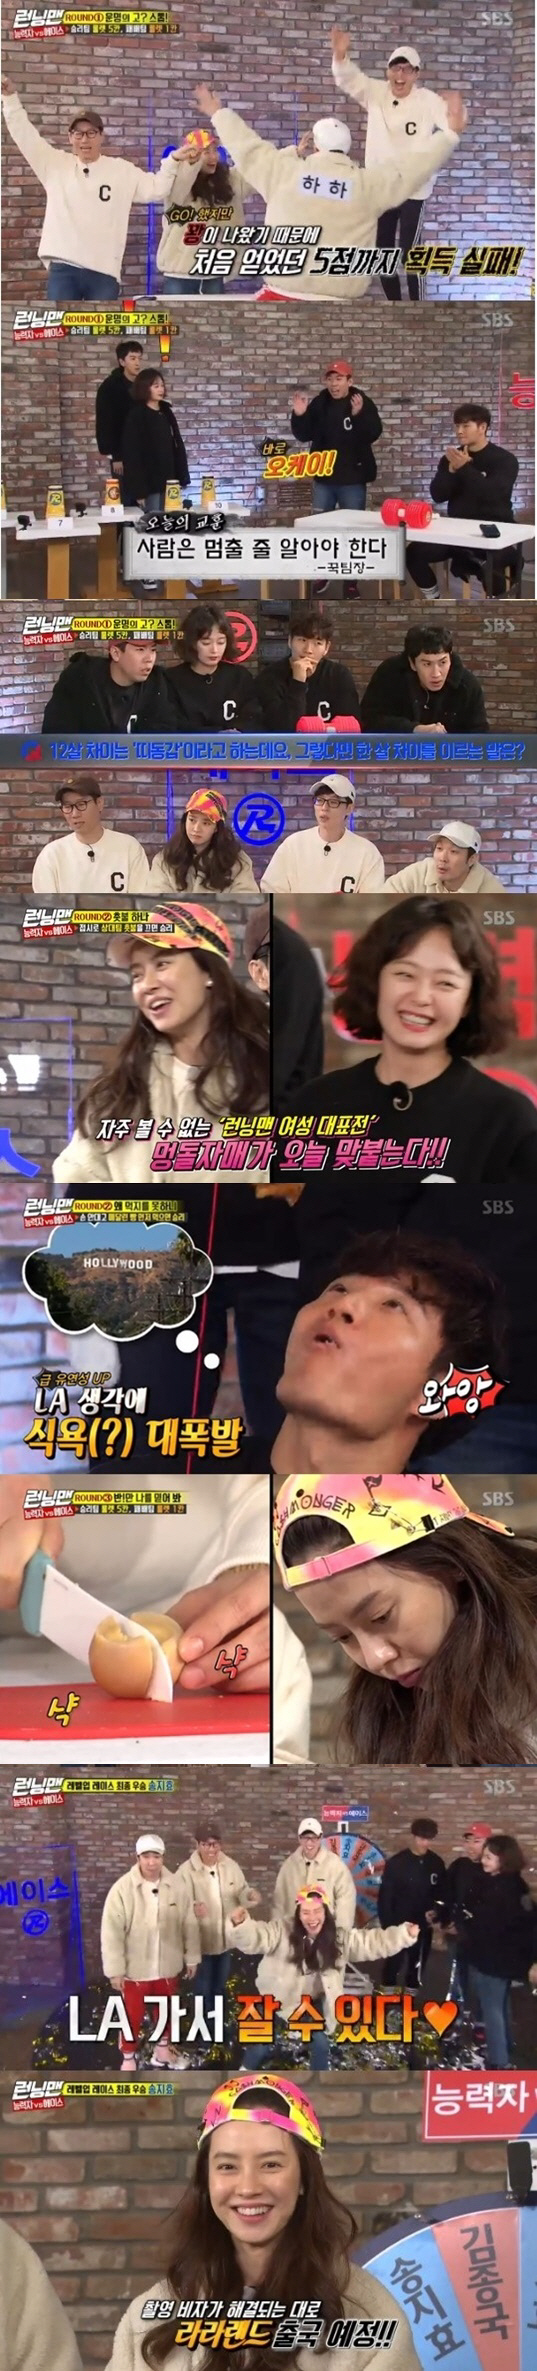 SBS Running Man ratings rose vertically in the confrontation between Ace and Ace.According to Nielsen Korea, the ratings agency Running Man, which was broadcast on the 10th, recorded an average audience rating of 5.9% and the second part recorded 8.1% (based on the audience rating of households in the metropolitan area), which was 2.2% higher than last week.The highest audience rating per minute rose to 9.8%, which is close to 10%, and the 2049 target audience rating, which is an important indicator of major advertising officials, ranked first in the same time zone with 5.4% (based on two-part ratings).On this day, the first project of the new year, Race Level Up Race winner Ace Song Ji-hyo and Ability Kim Jong-kook were intrigued by the confrontation.The winner was able to pick one of the team members and get the luck of going on a trip to LA together, while Song Ji-hyo and Kim Jong-kook announced their respective LA travel plans.As a team, Song Ji-hyo, Yoo Jae-Suk, Ji Suk-jin, Haha, and the talented team consisted of Kim Jong-kook, Lee Kwang-soo, Yang Se-chan and Jeon So-min.The three-round showdown was a roulette-kan set up following round-by-round victories, and each team was tense with a fierce confrontation. Round 1 Go of Destiny? Stop!, Yoo Jae-Suk and Lee Kwang-soos Kangson Parade followed, but Ace team won in the performance of Goldson Song Ji-hyo.The second round was a game victory for the Ace team, but the Ace team did not overturn the Ace teams dominance, and the third round also took the Ace team victory.Song Ji-hyo, who took more roulette Khan, turned roulette into a final showdown with Kim Jong-kook, and Roulette stopped in Song Ji-hyos name.The scene jumped to 9.8% of the highest audience rating per minute, taking the best one minute.